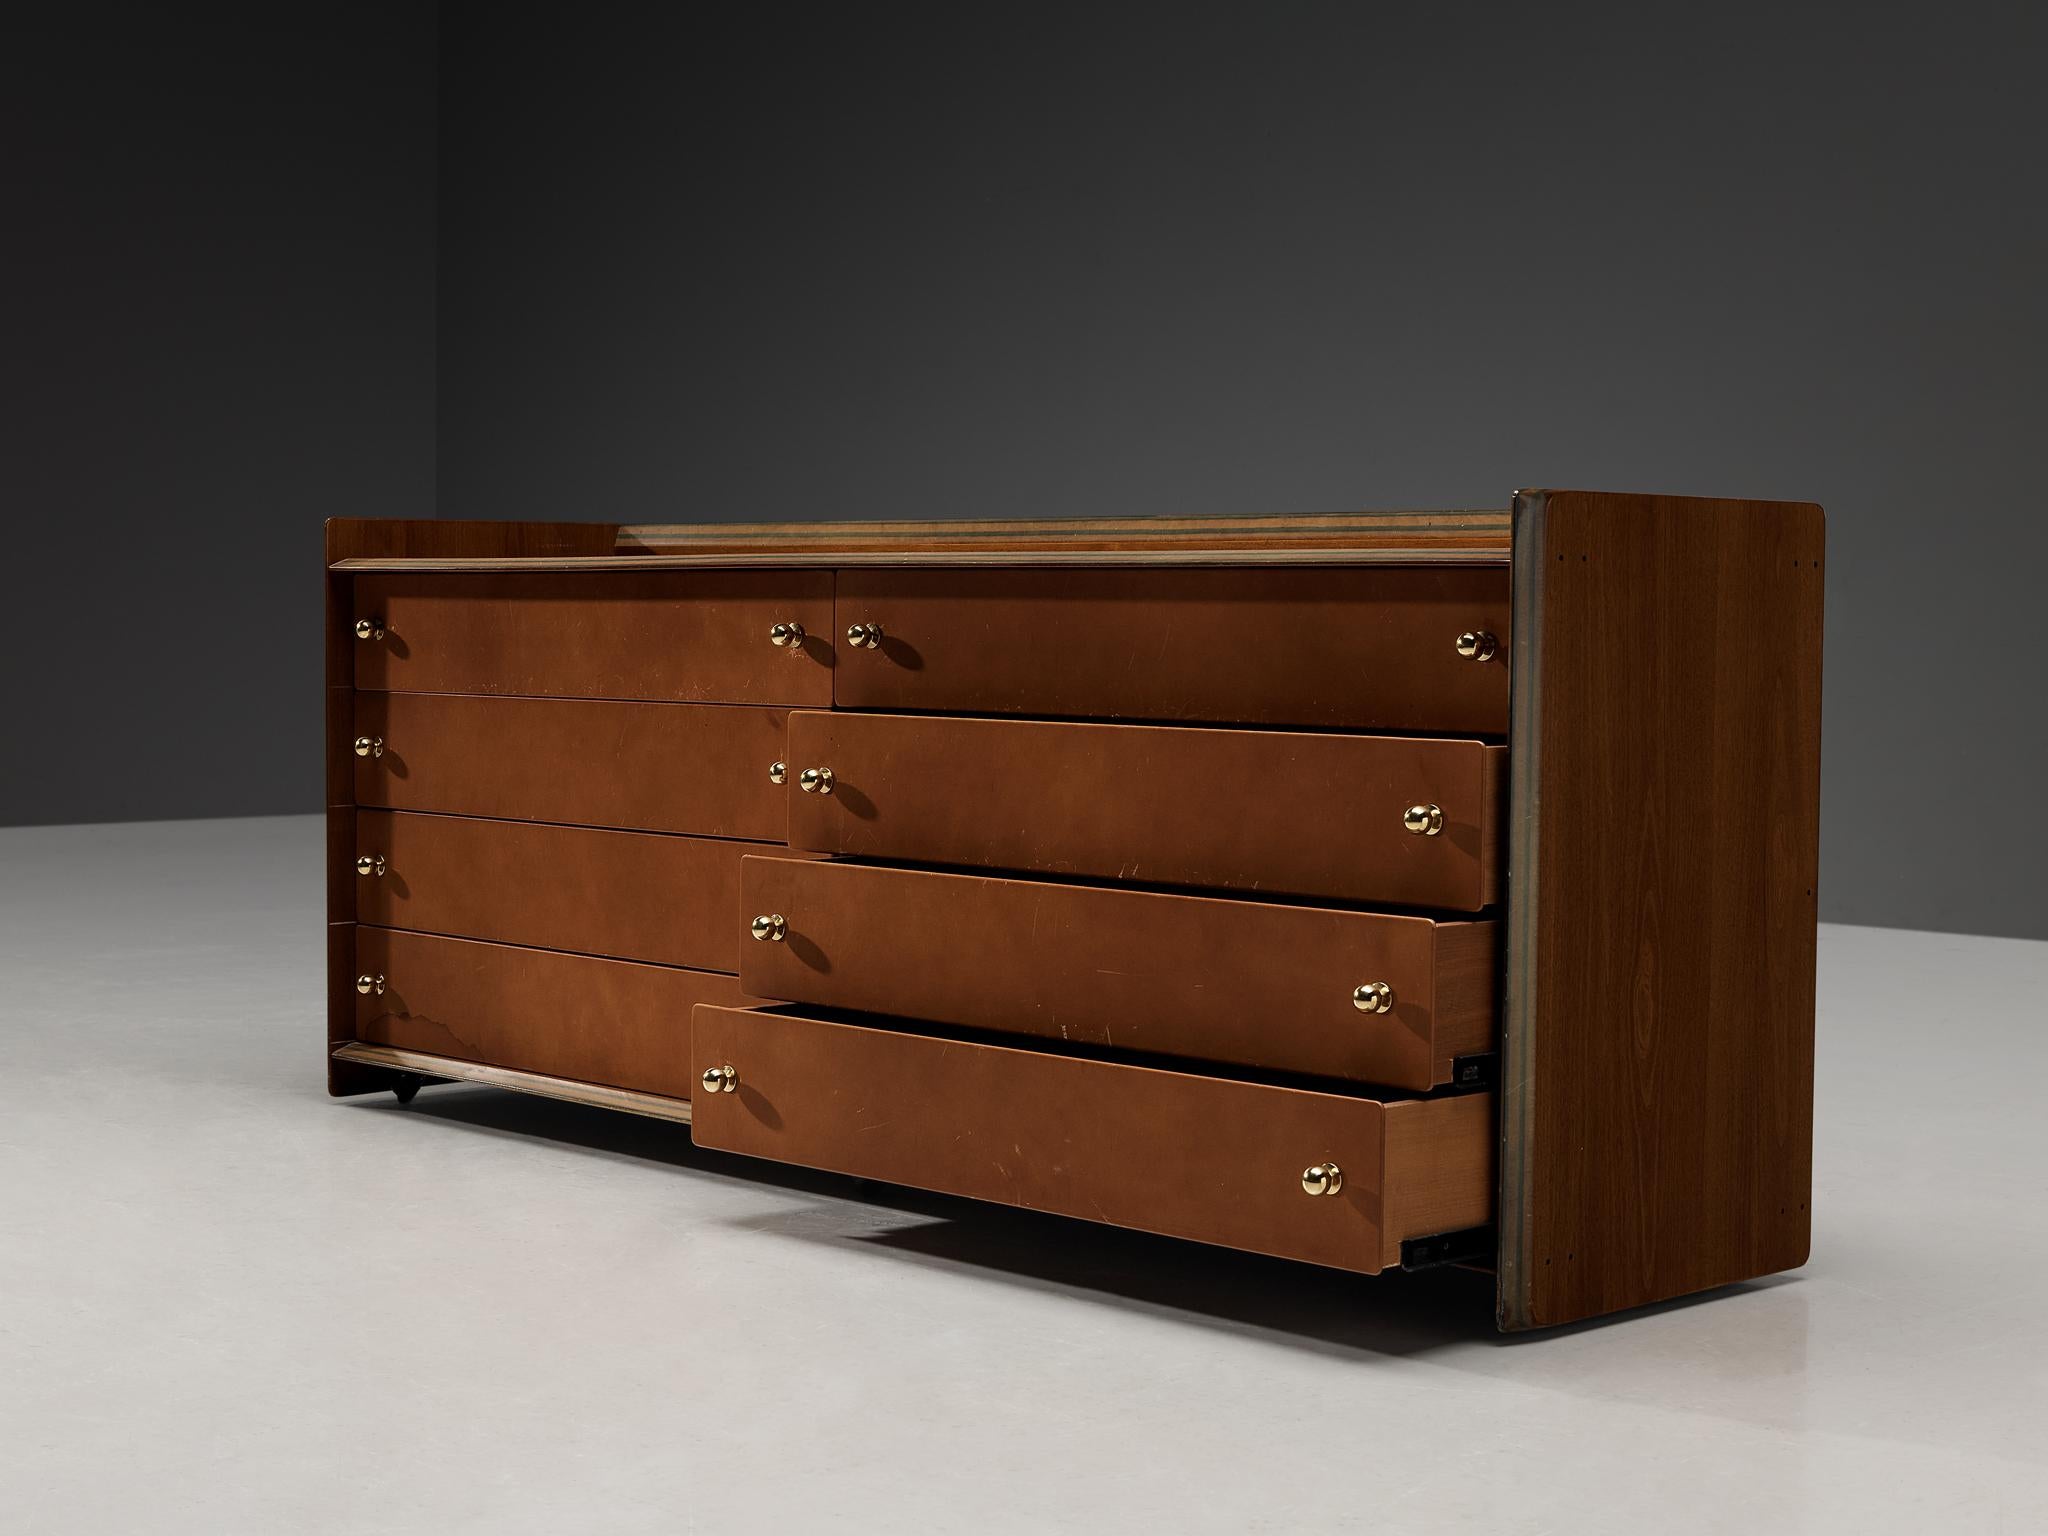 Afra & Tobia Scarpa for Maxalto 'Artona' Chest of Drawers in Walnut and Leather 2